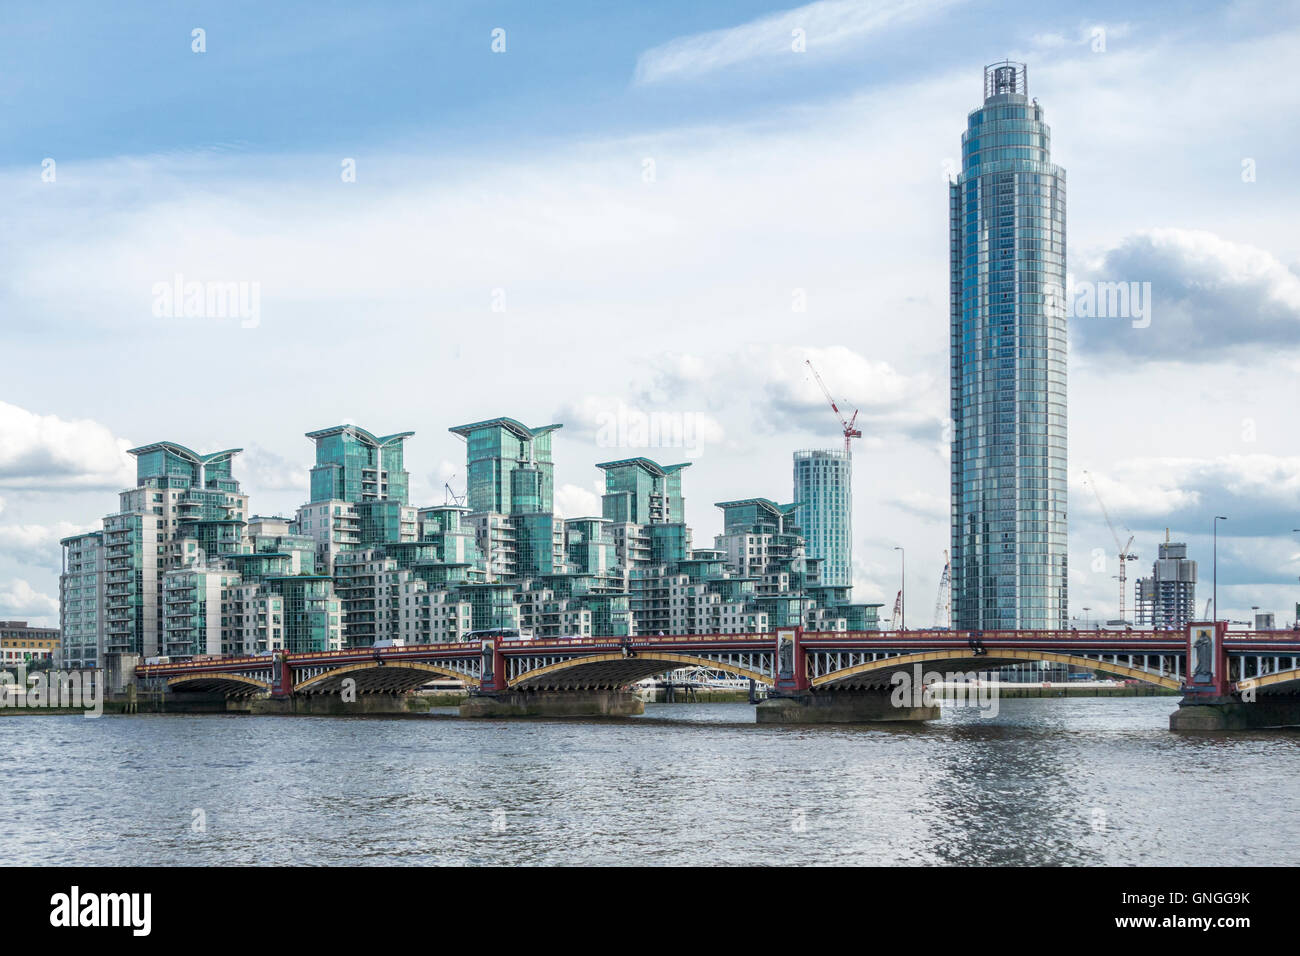 St George Wharf & The Tower am Südufer der Themse, London, UK Stockfoto